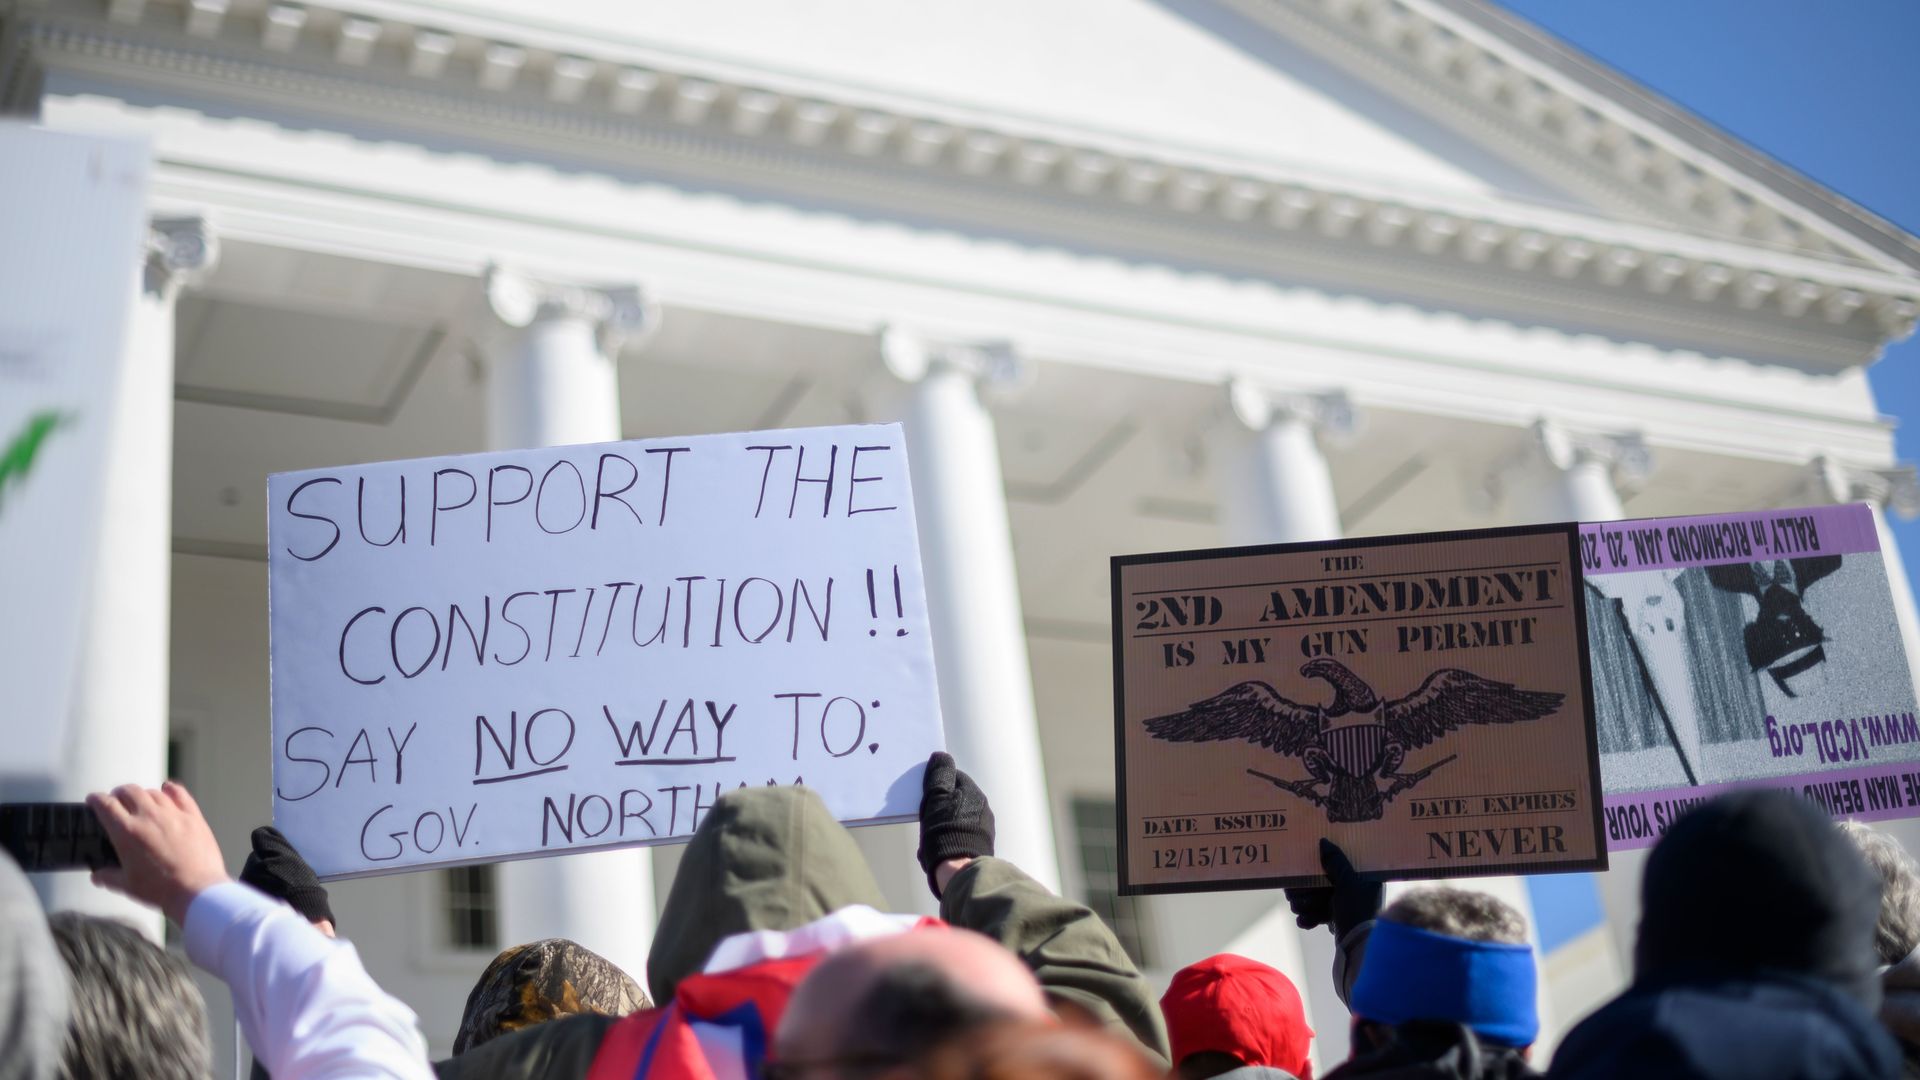 Gun rights ralliers at a protest outside the Virginia Capitol Building in January. Photo ROBERTO SCHMIDT/AFP via Getty Images.